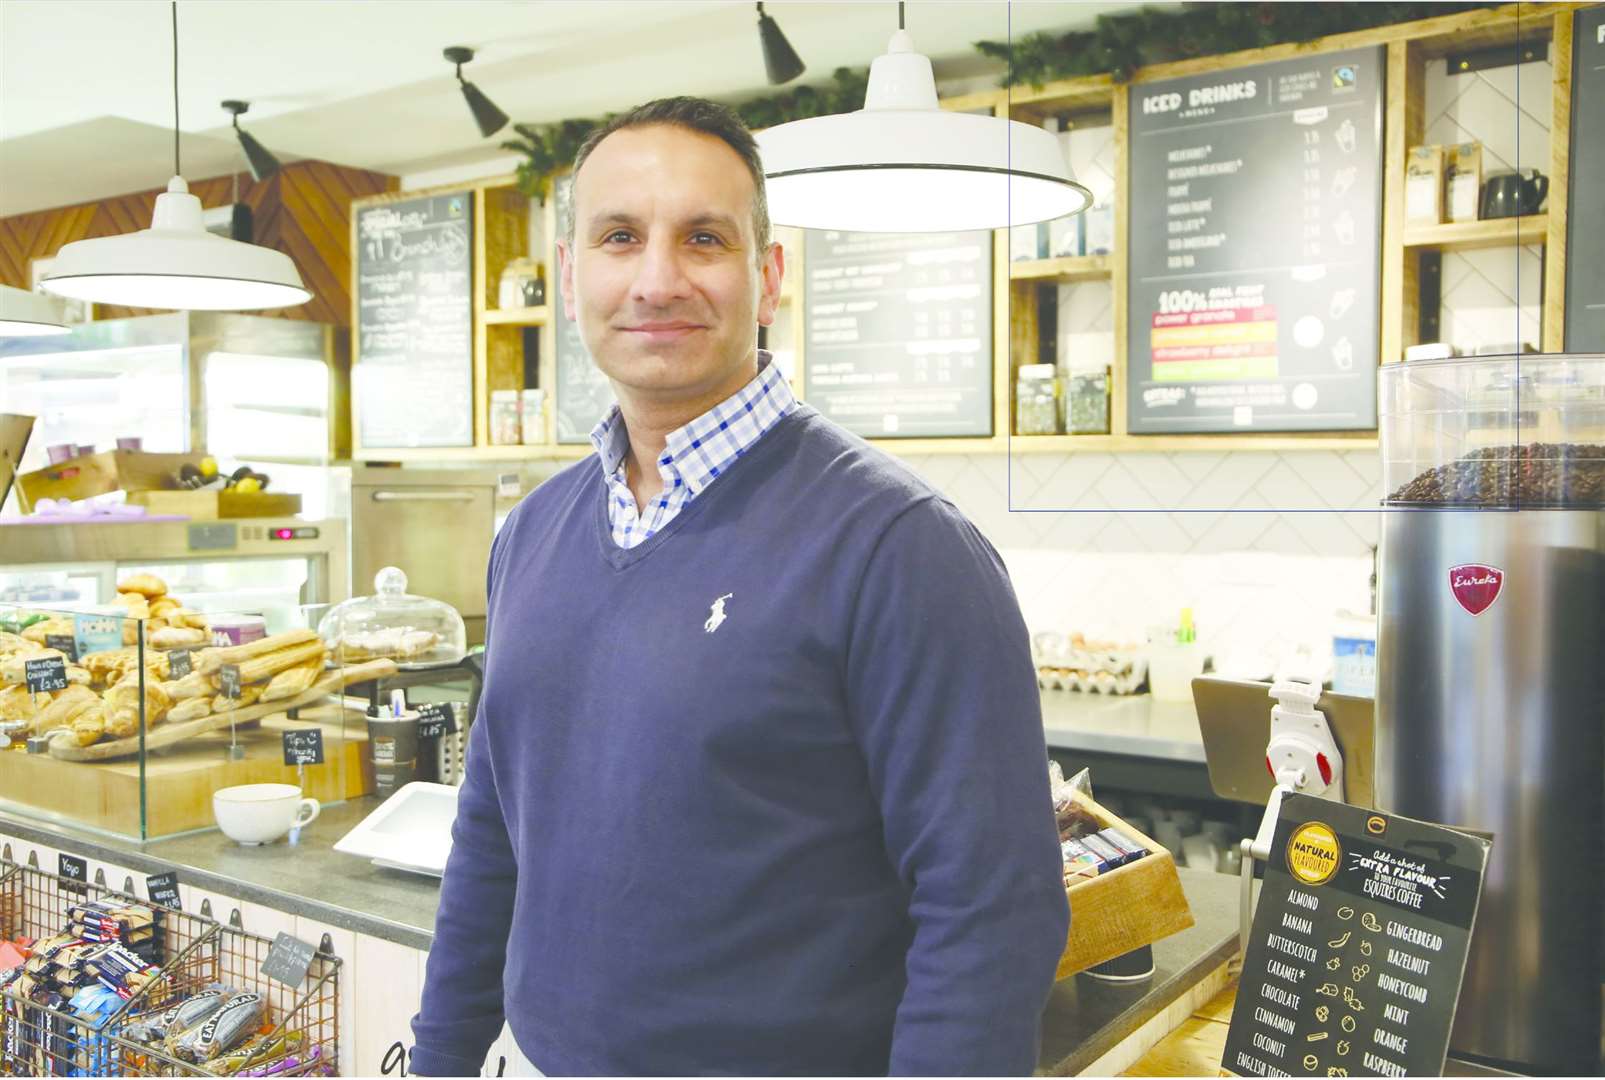 Gurjit Randhawa, of Esquires Coffee in Dartford says the business faces a tough few months ahead